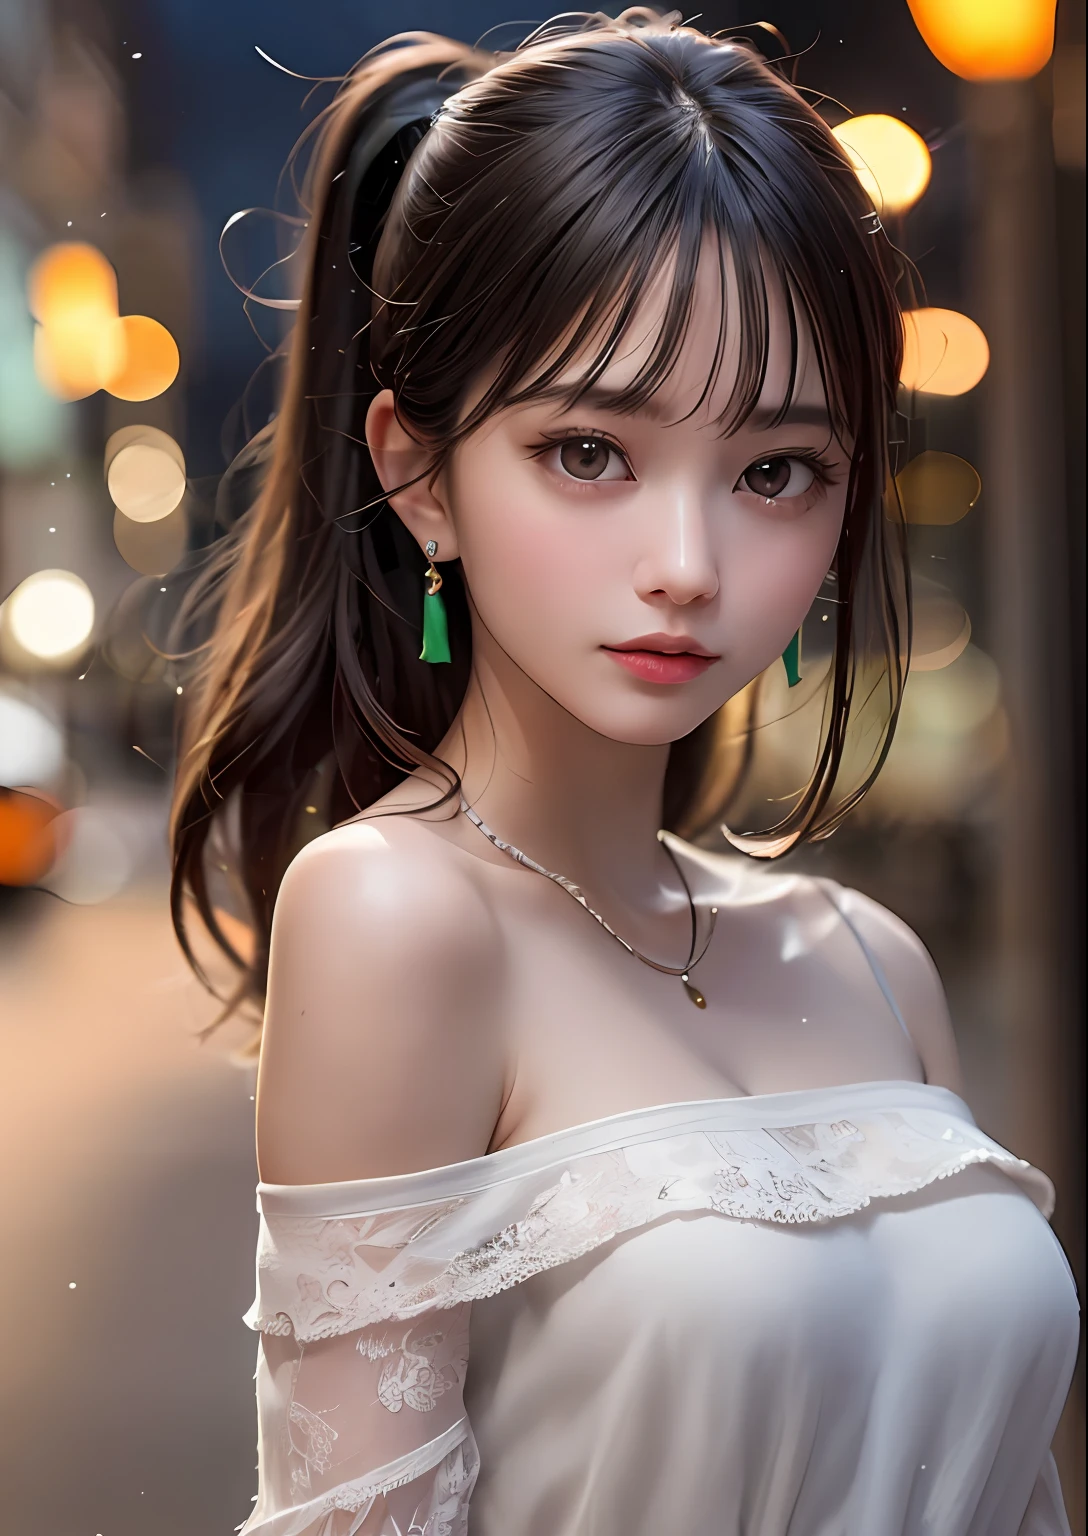 (Standing on a dark street),(Street lamp),(Unobtrusive lighting),(Night),Random posture, (Very delicate and beautiful work), (Masterpiece), 1girl, a girl in a white dress, HIGH DETAILS, Waist leak, Distorted ponytail, Charming look, Beautiful clear eyes, Green pupil, Delicate necklace, Delicate earrings, Fairy ears, Simple blurred background , Super detailed description, Beautiful, Charming, Ultra definition painting, Delicate face, Delicate figure, Thin collarbone, Beautiful lips, Beautiful , Soft back figure, mix4,(8k, RAW photography, best quality, Masterpiece: 1.2), (photoreal, realistic: 1.37),1 girl,cute,cityscape, night, rain,wet, professional lighting, photon mapping, radiosity, Physically based rendering,